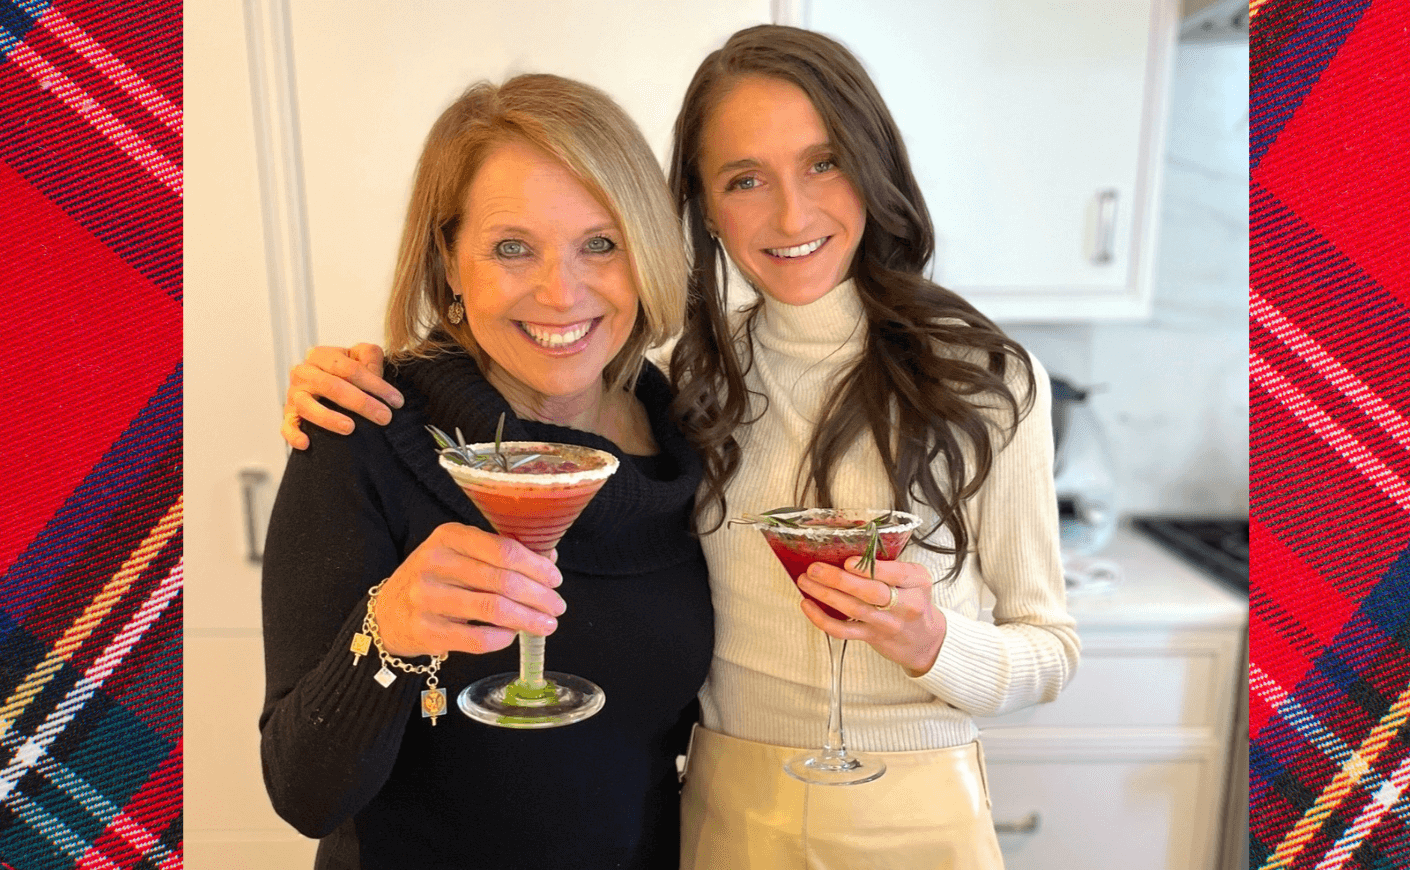 Katie Couric with the founder of Half-Baked Harvest, holding cocktails